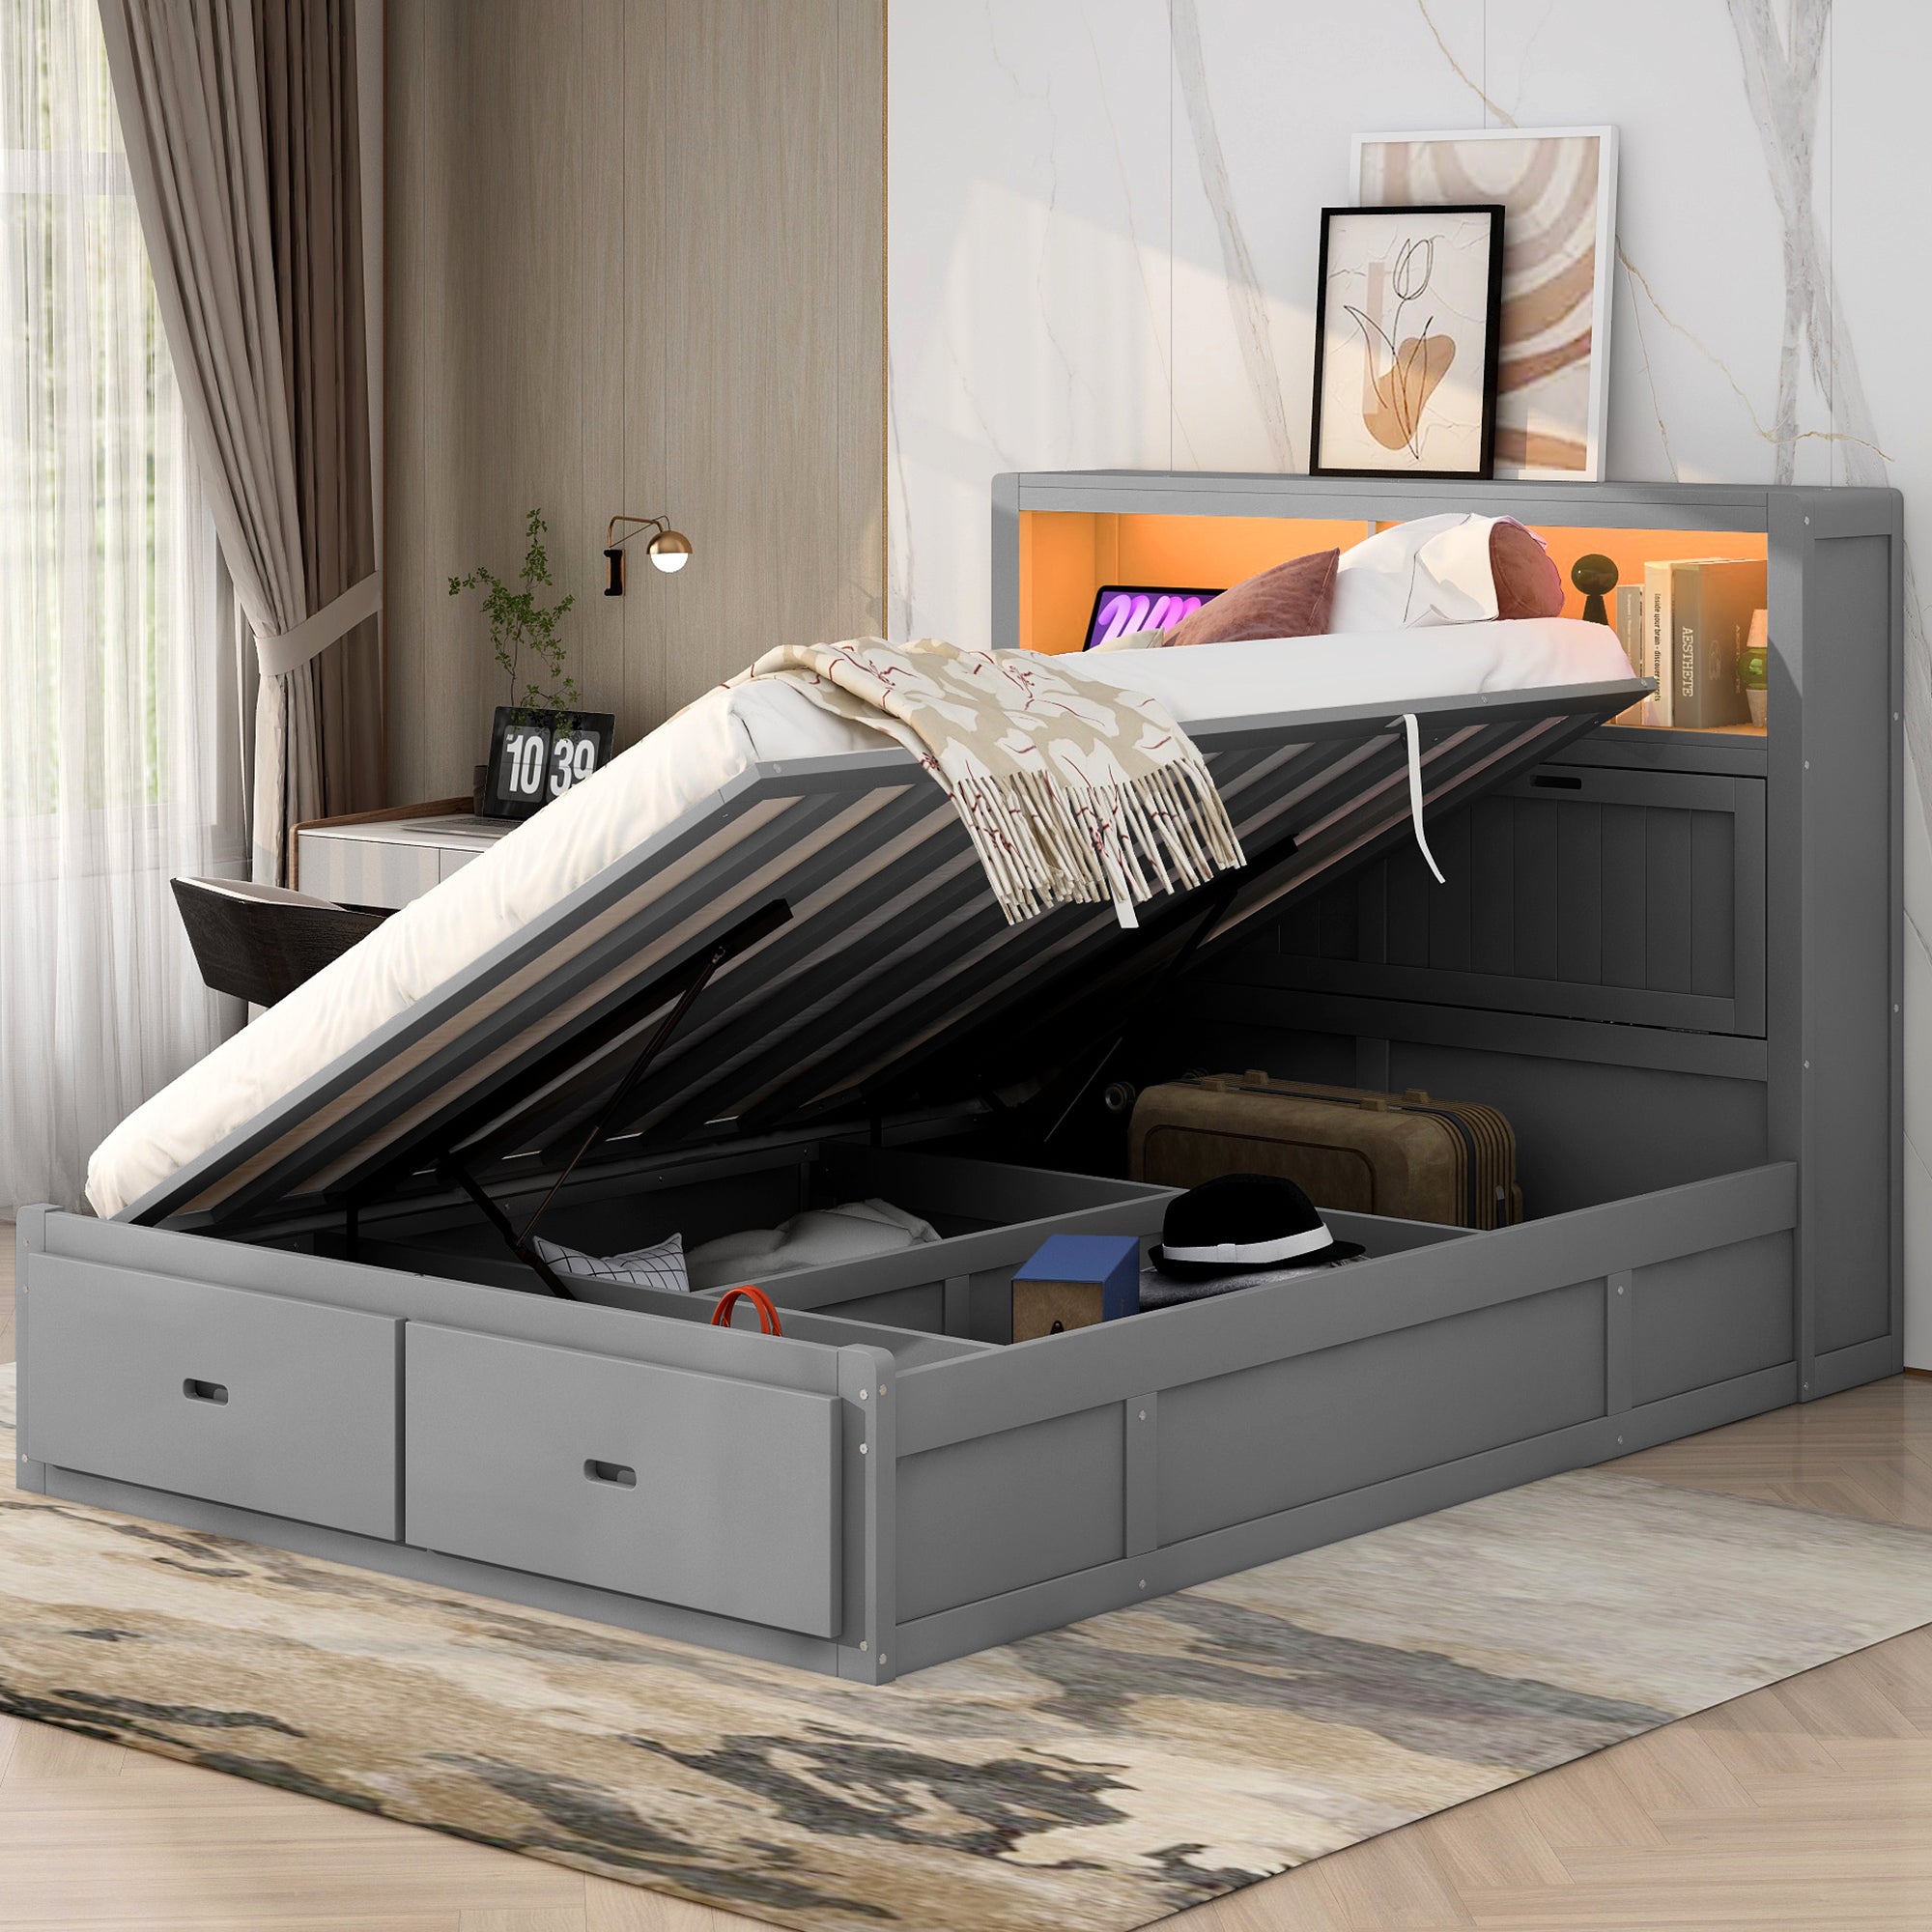 🆓🚛 Wood Queen Size Hydraulic Platform Bed with Storage LED Headboard, Charging Station and 2 Drawers, Gray